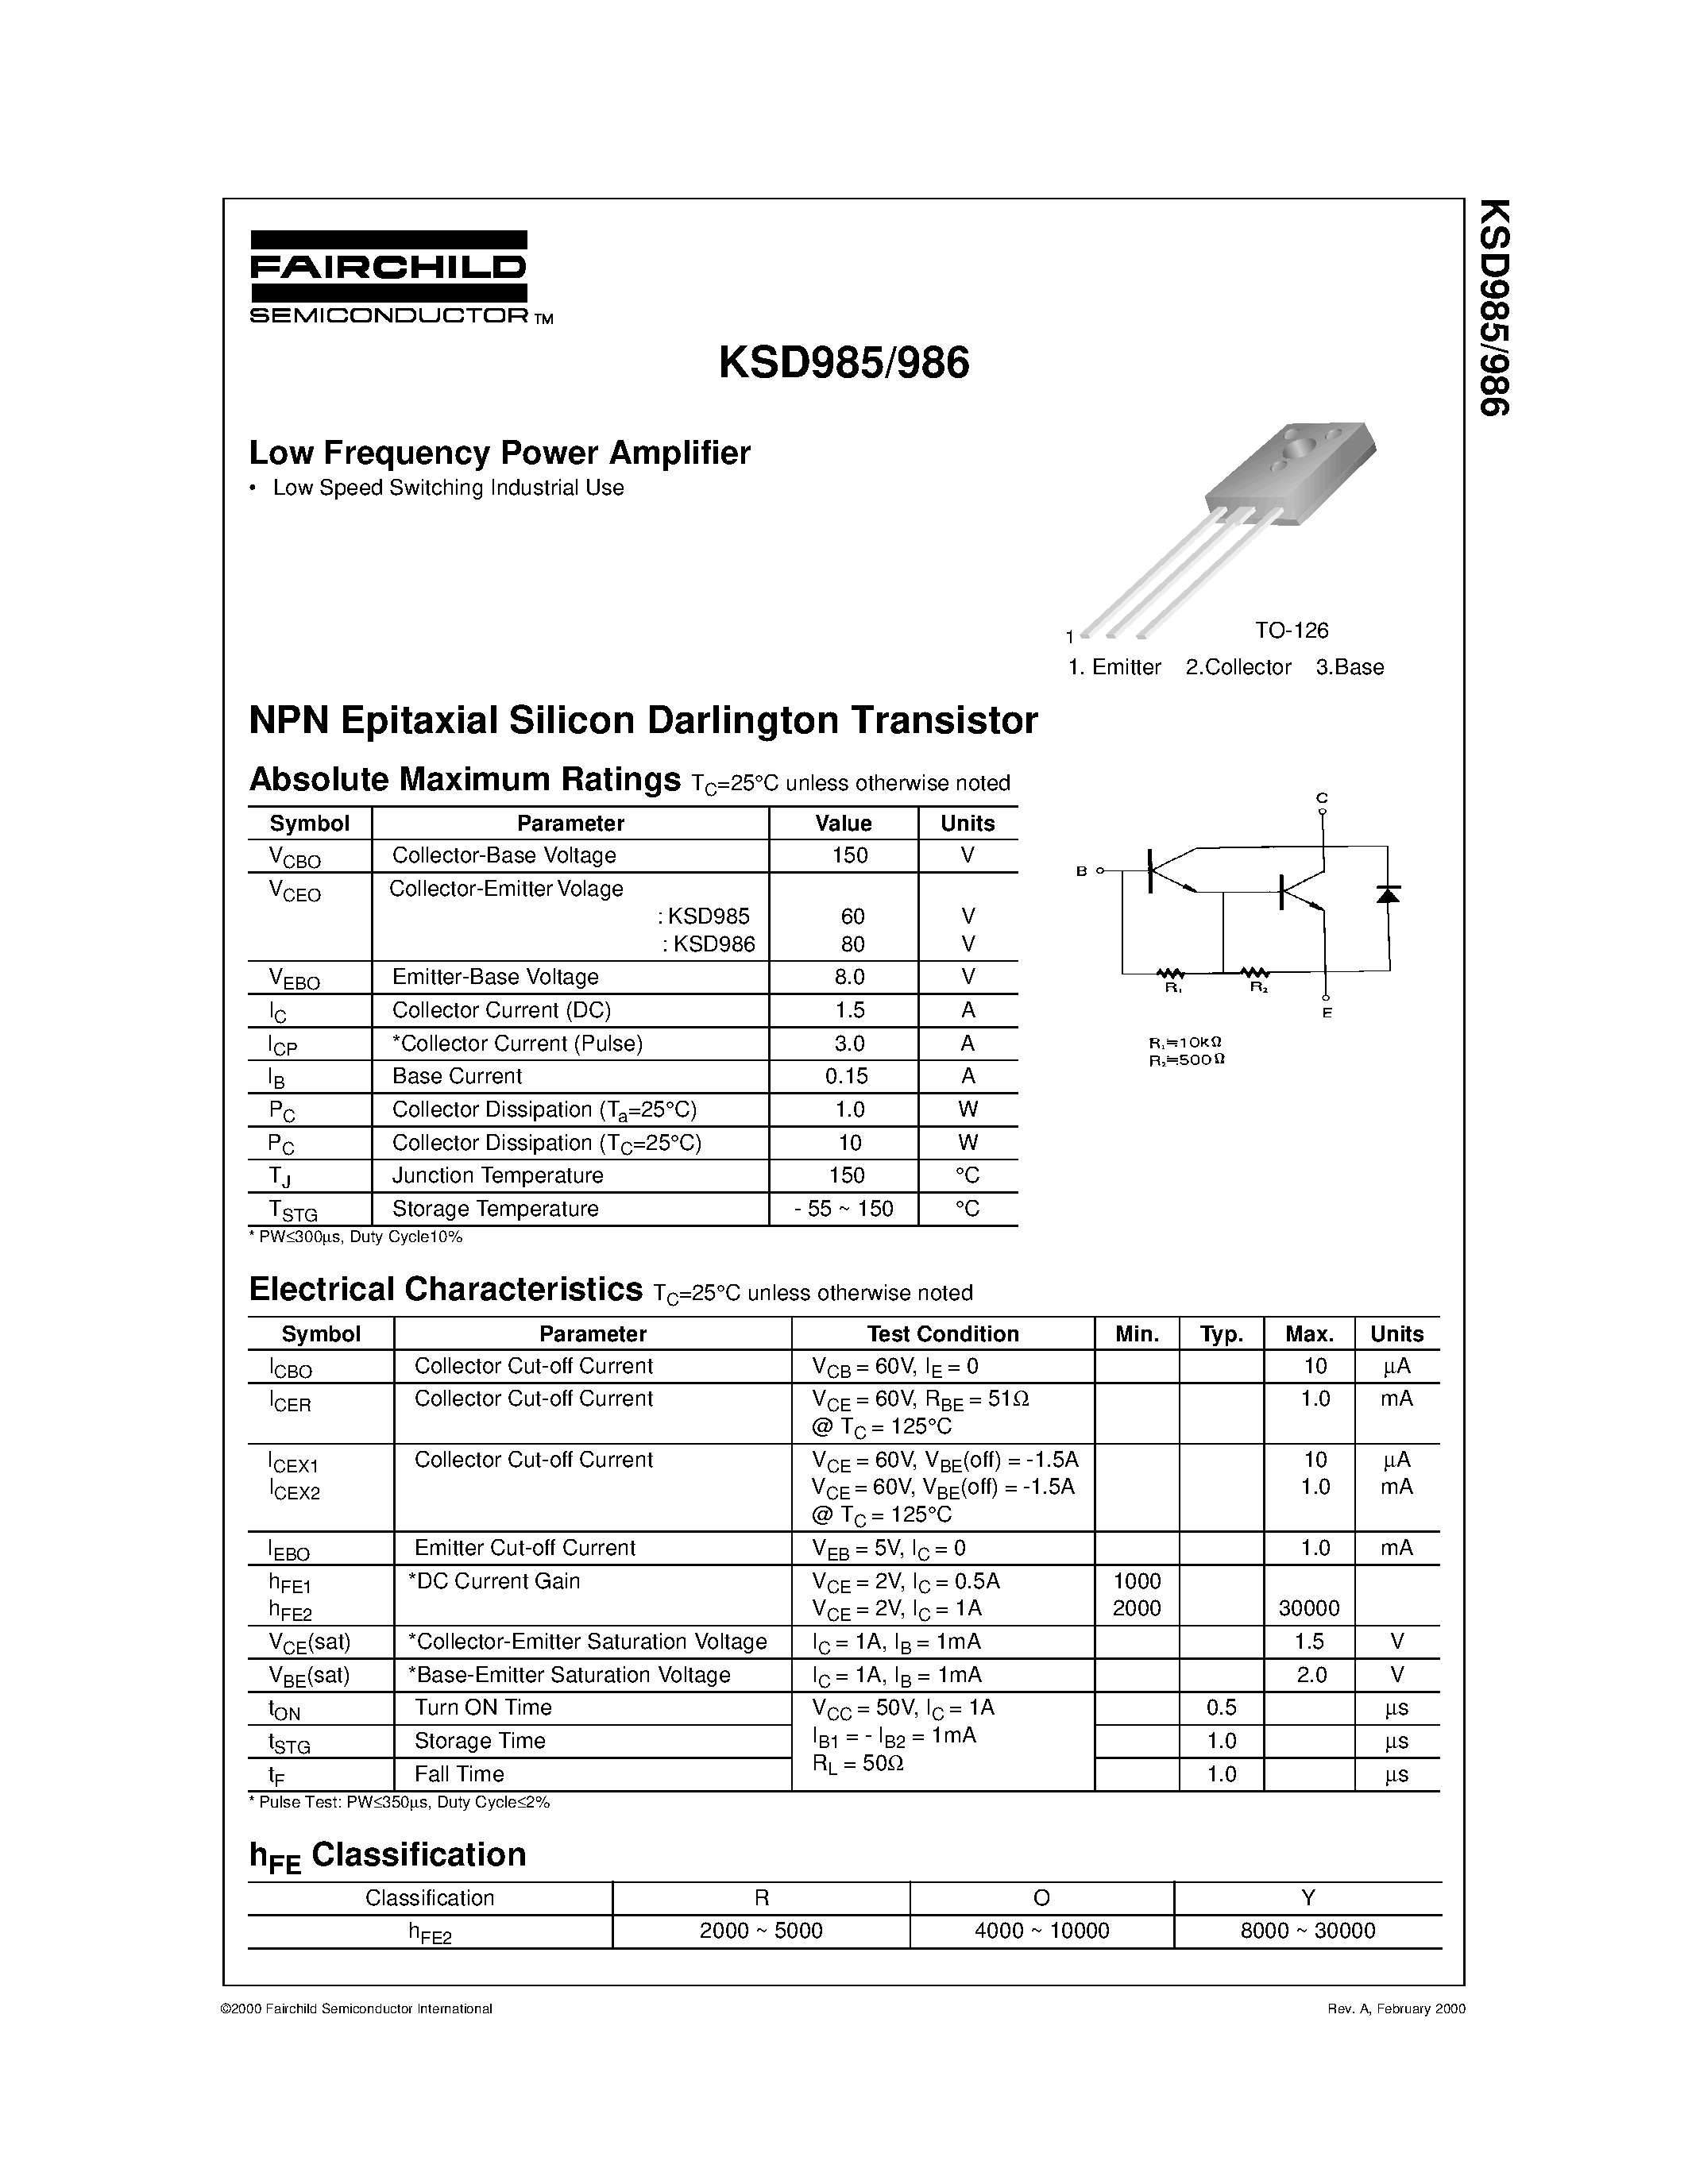 Datasheet KSD985 - Audio Frequency Power Amplifier page 1